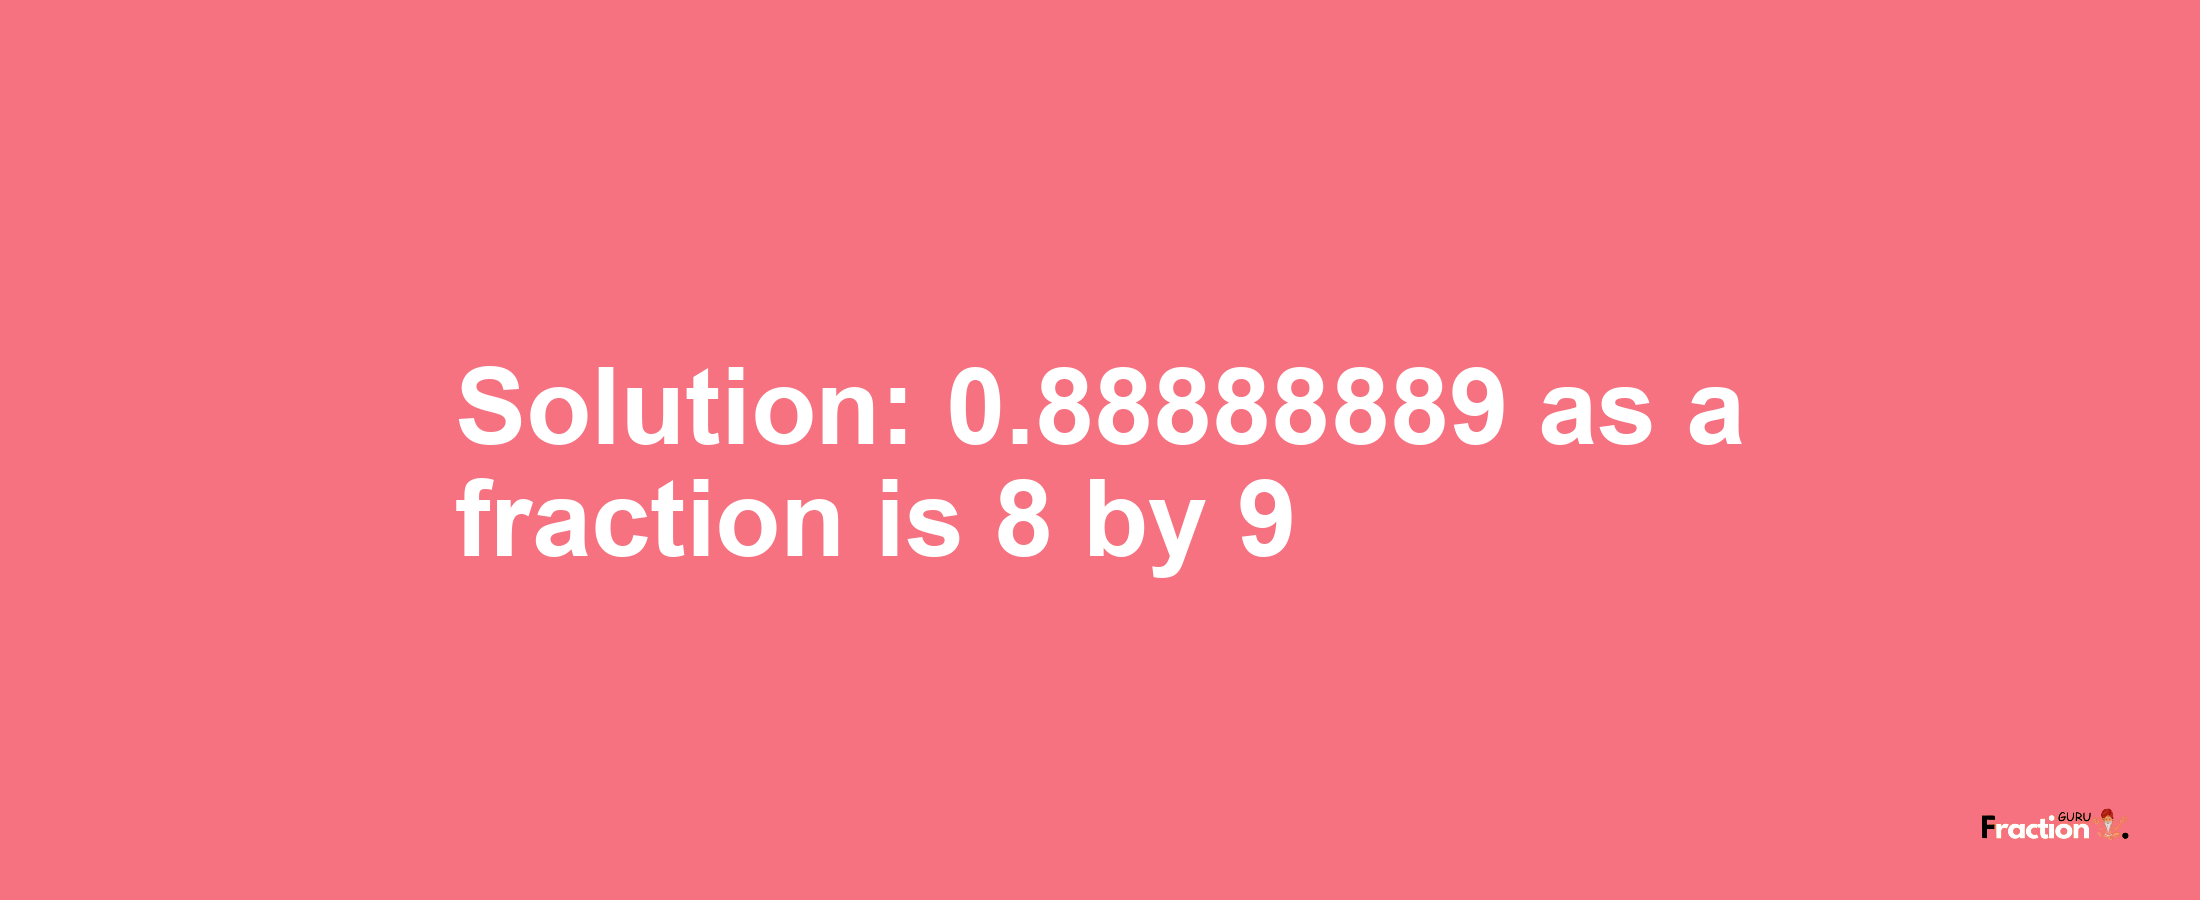 Solution:0.88888889 as a fraction is 8/9